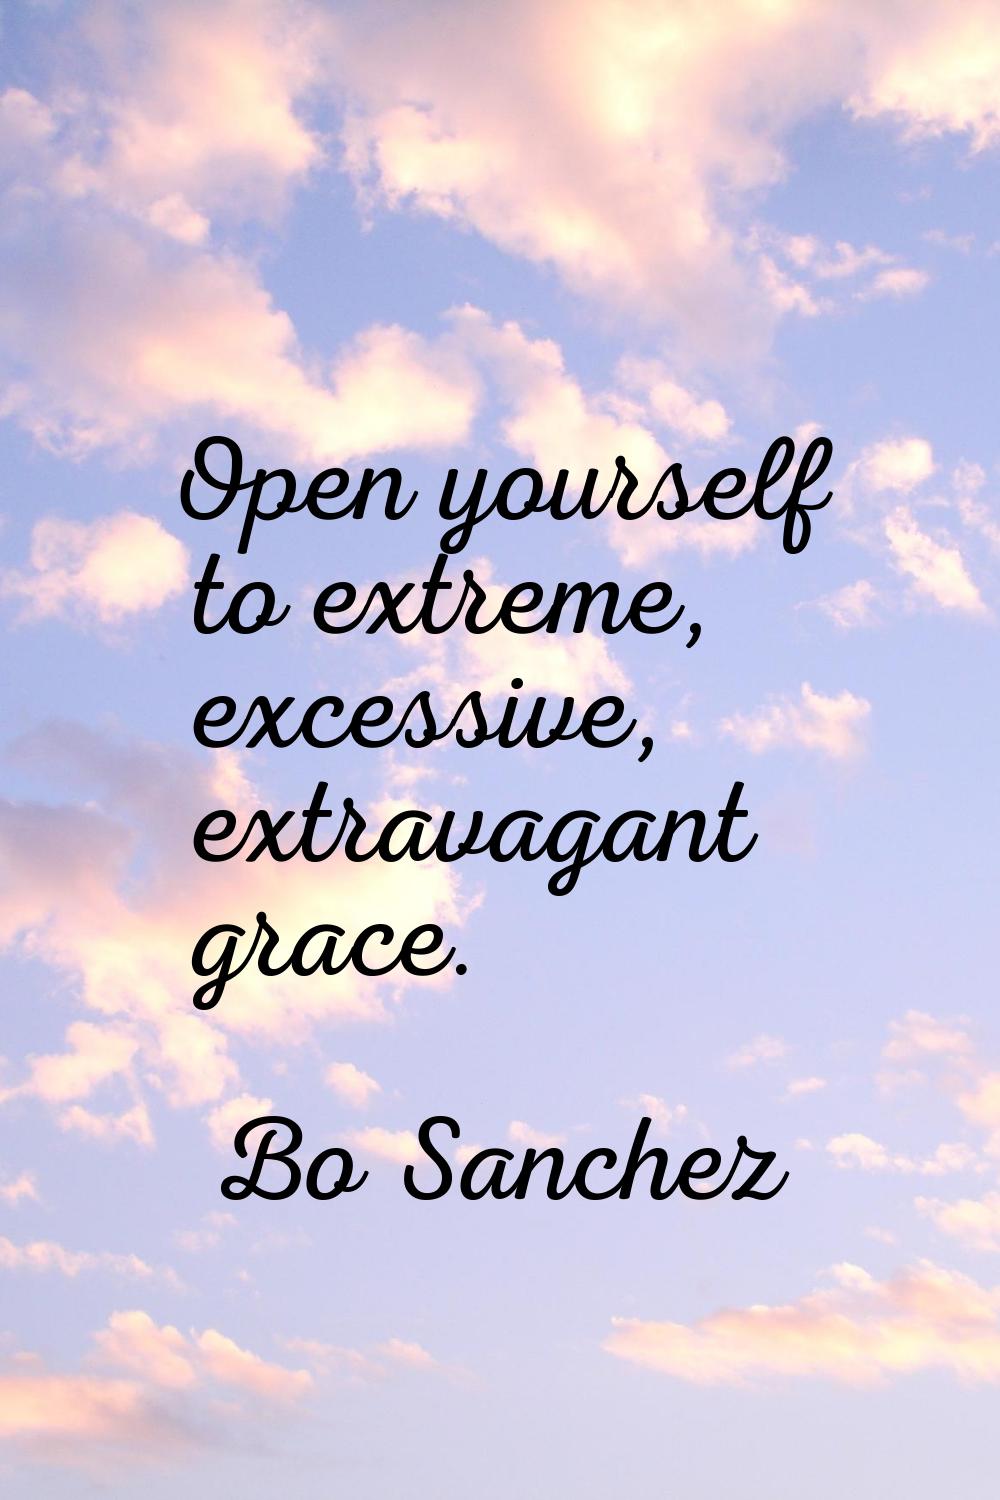 Open yourself to extreme, excessive, extravagant grace.